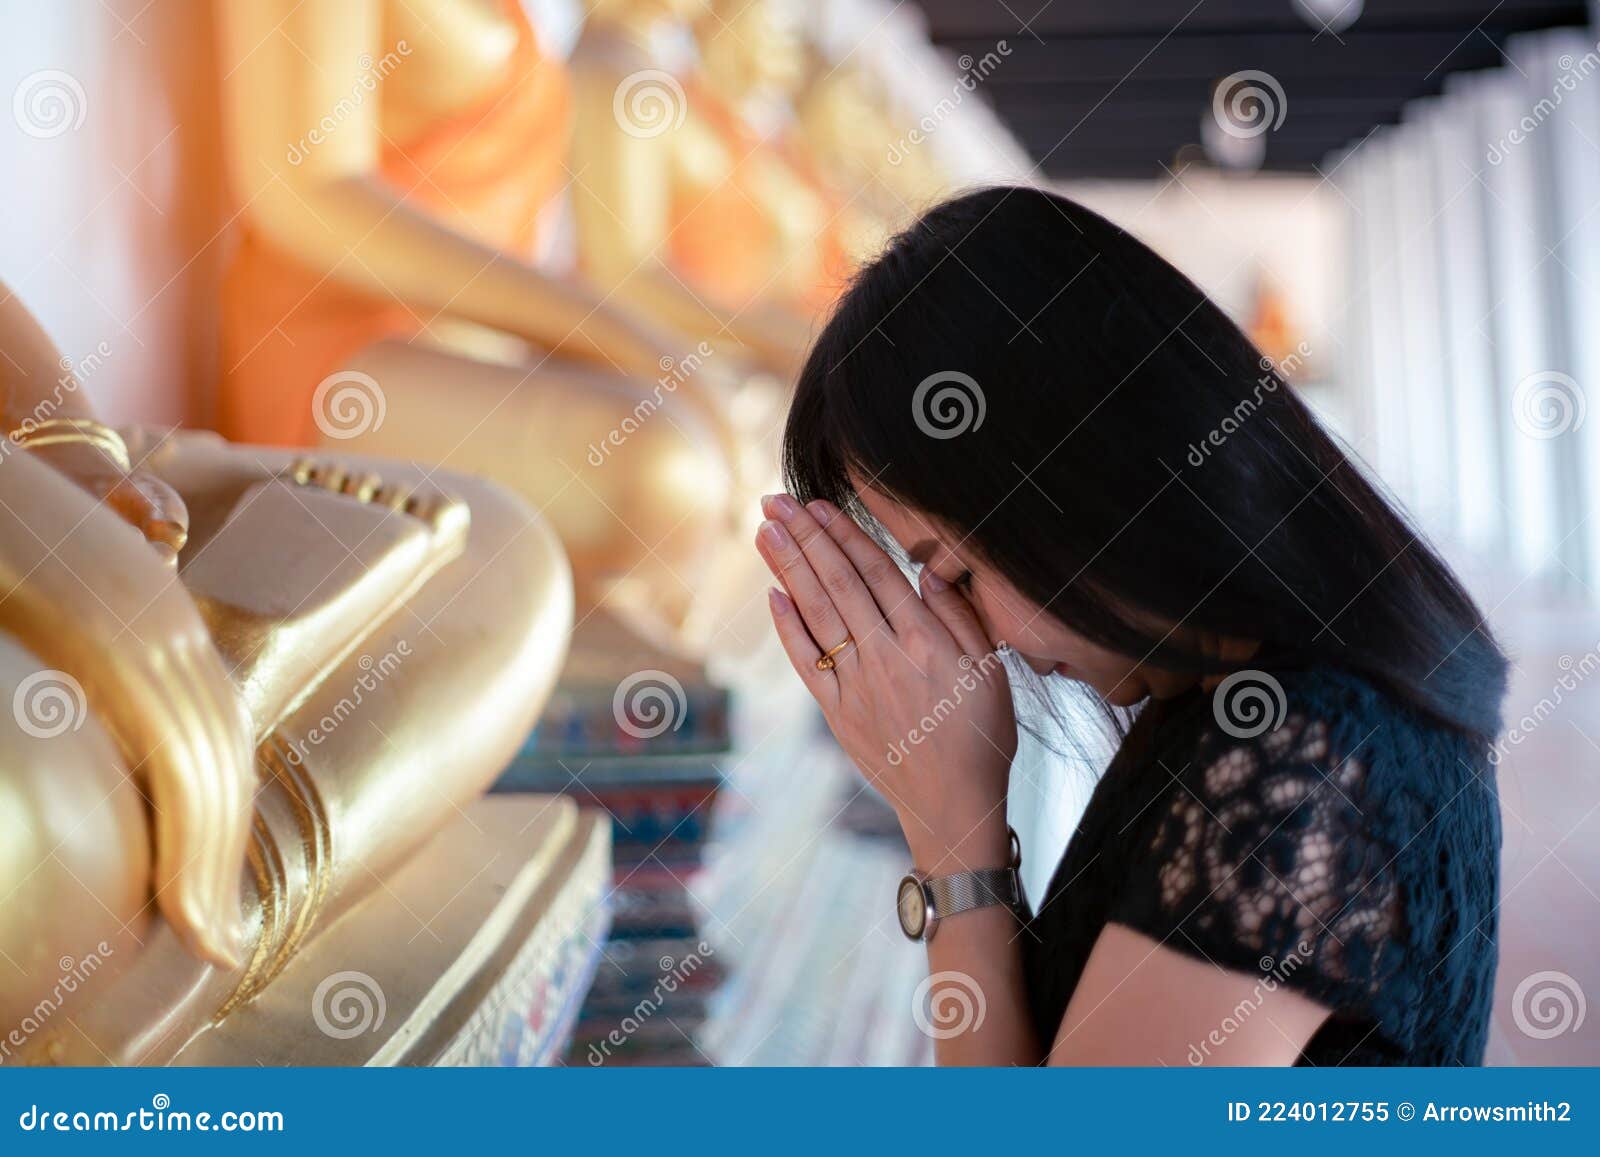 Asian Woman Pays Homage To The Buddha Statue With Respect And Faith Stock Image Image Of